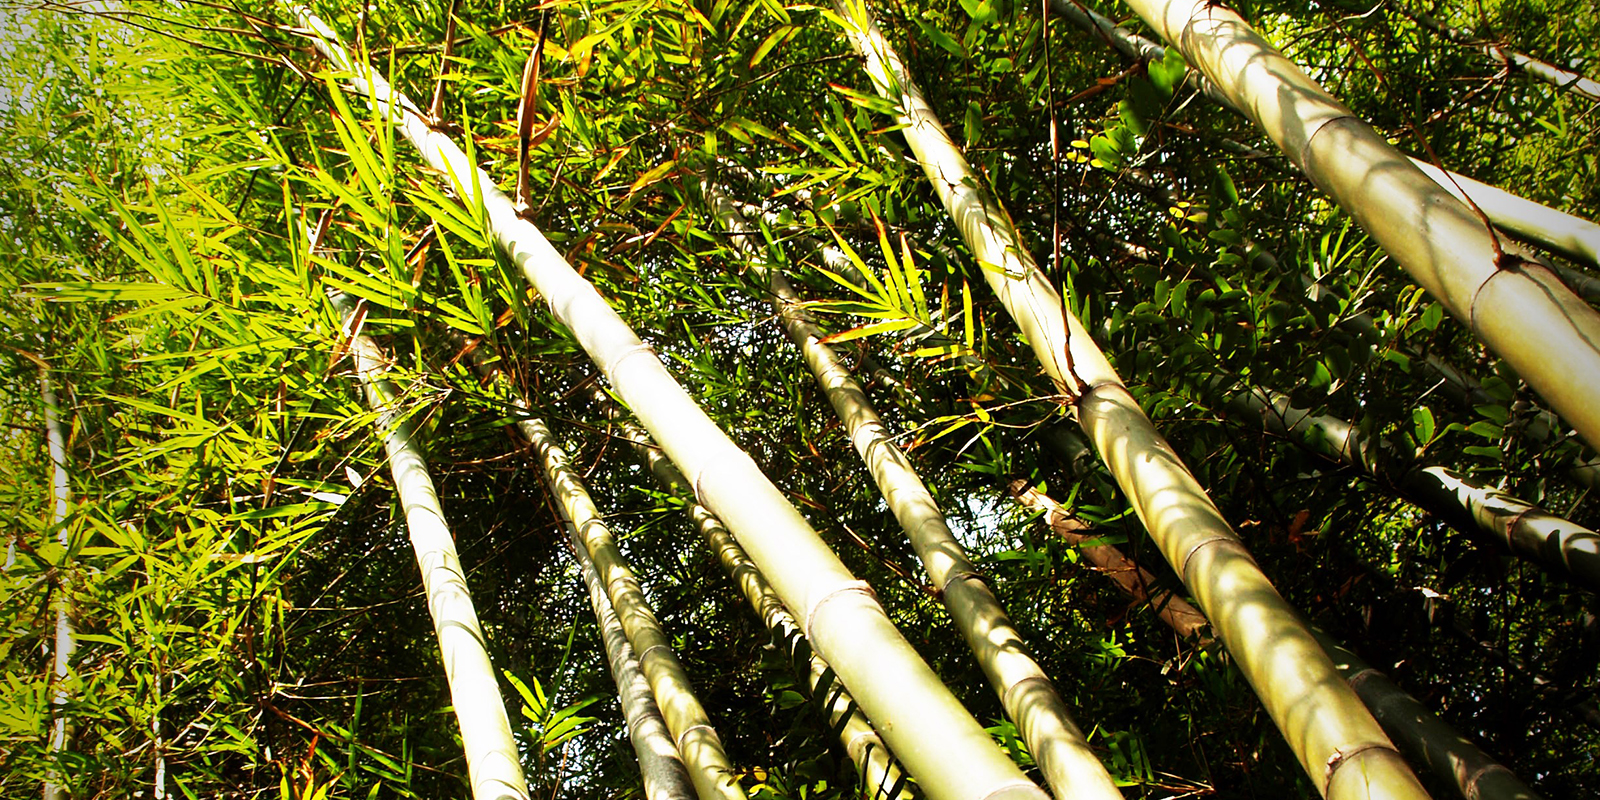 Bamboo Forest Background